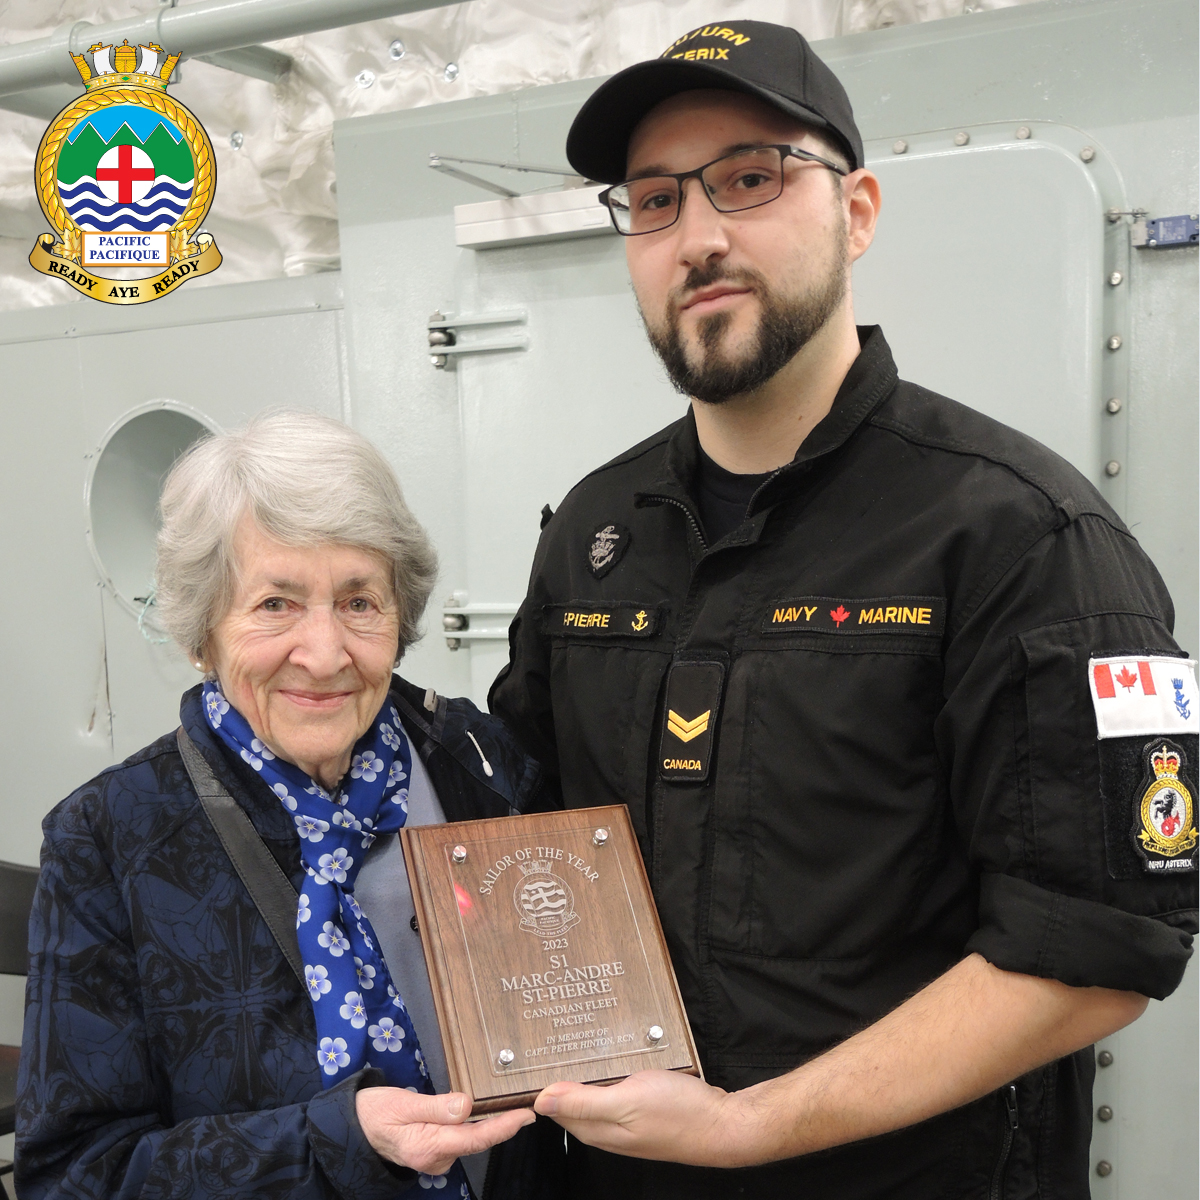 Sailor 1st Class Marc-Andre St-Pierre of NRU Asterix receives the Sailor of the Year Award for 2023 from Mrs. Geraldine Hinton during a ceremony aboard the vessel on Feb 22. Photo: Peter Mallett / Lookout
